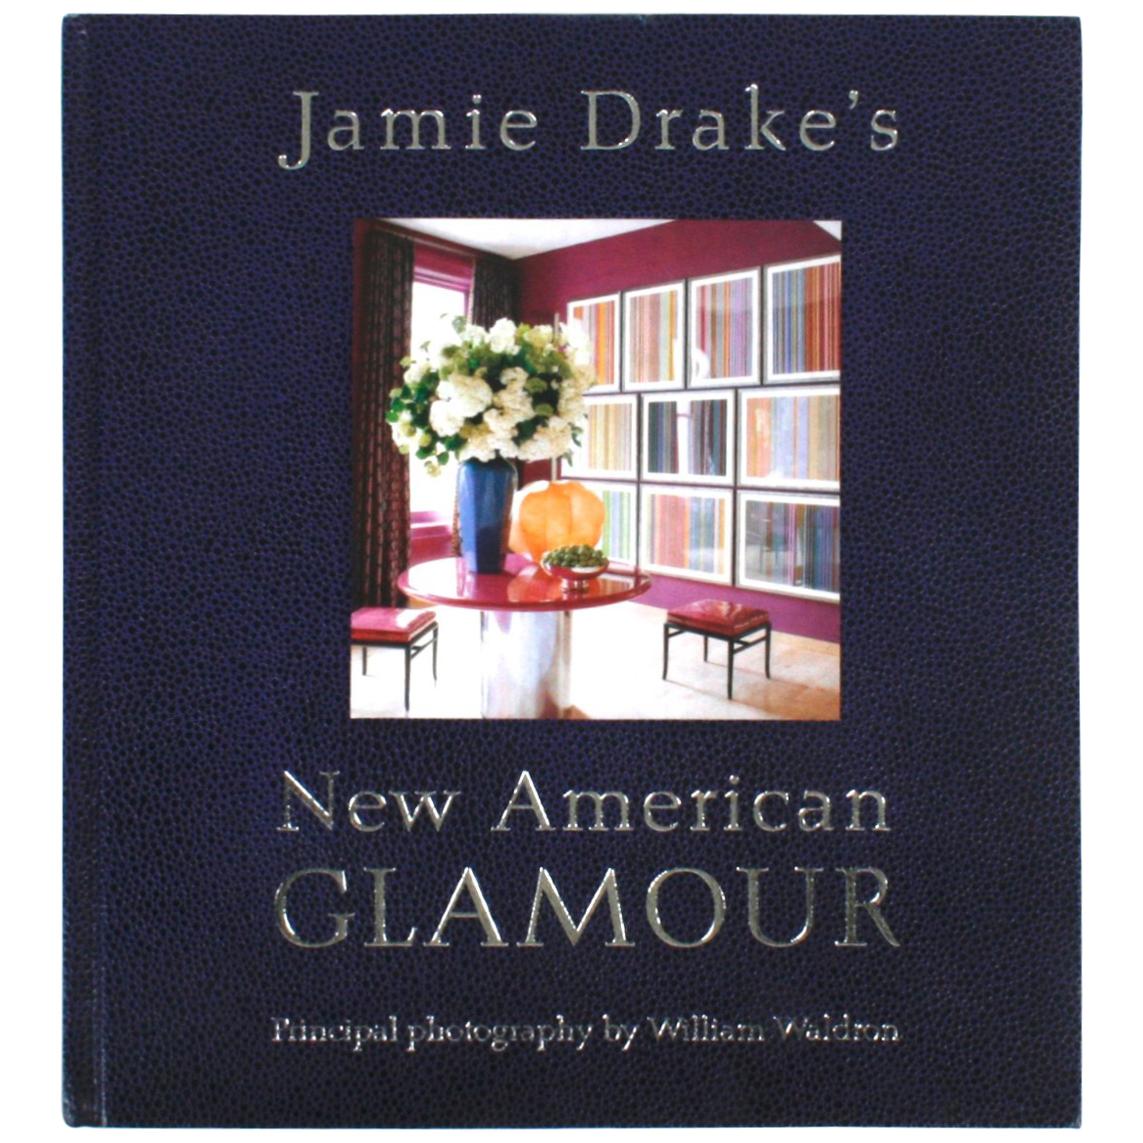 Jamie Drake's New American Glamour, First Edition